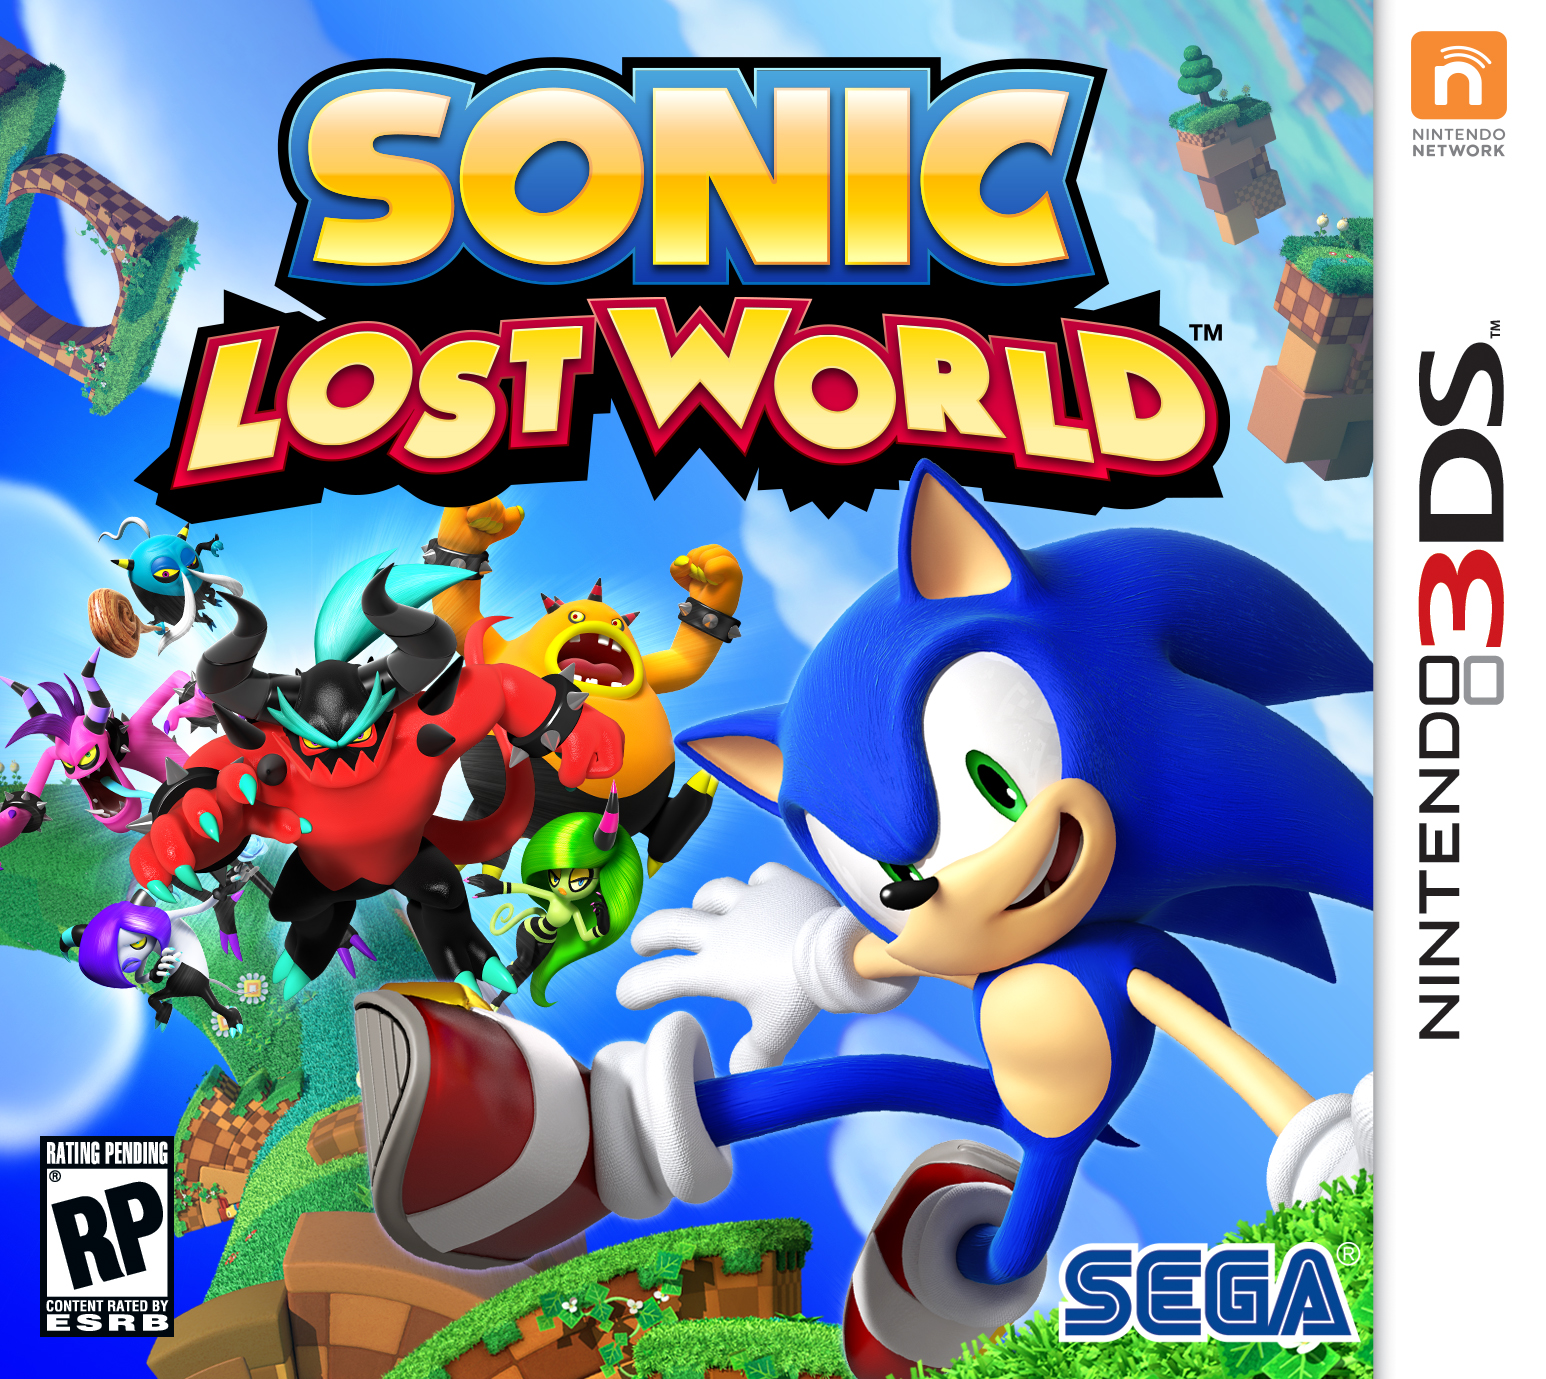 Sonic Lost World Differences Between Wii U And 3ds